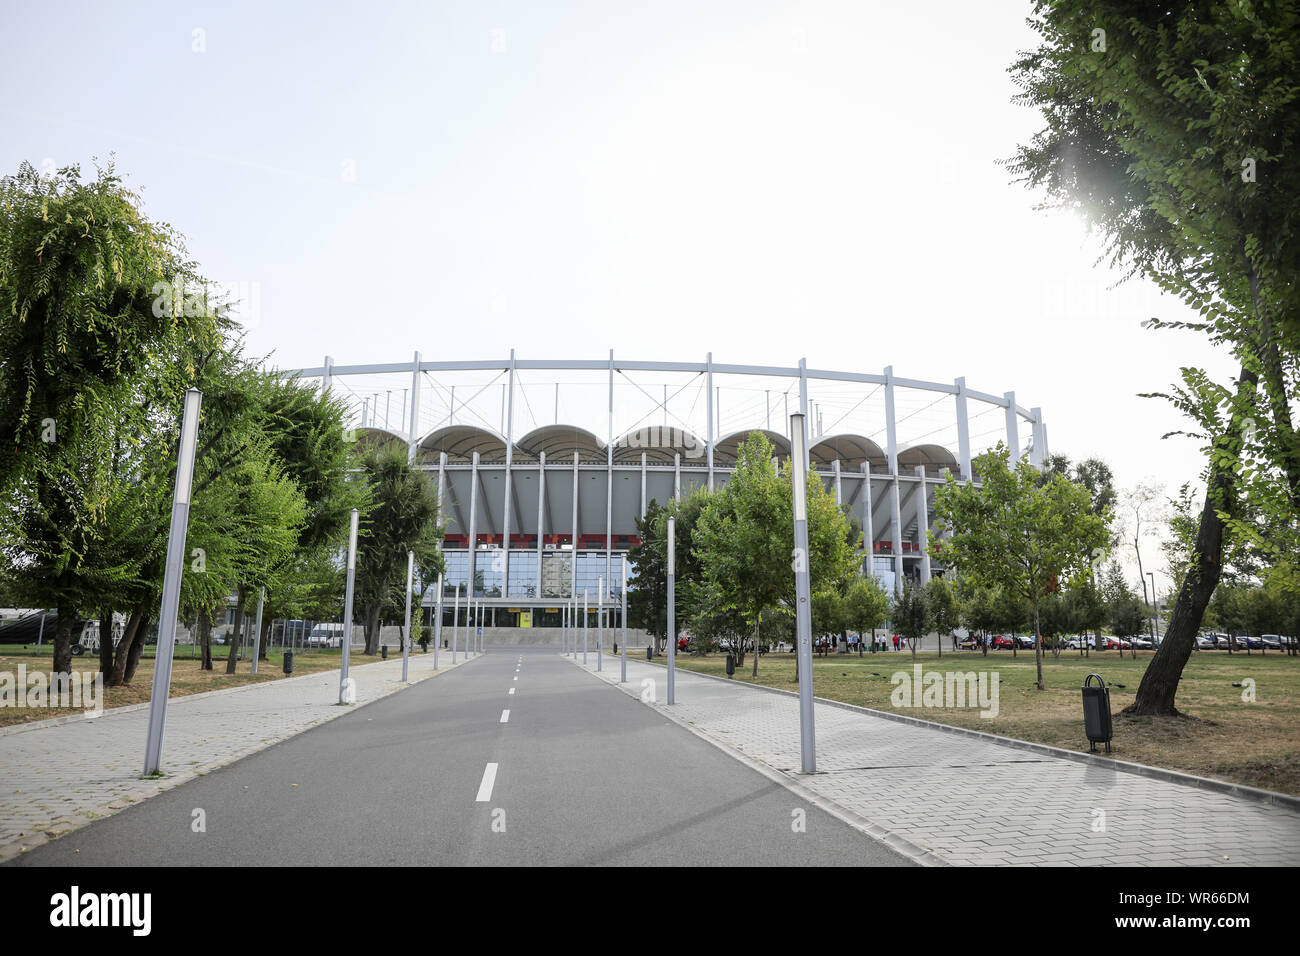 Bucharest, Romania - September 10, 2019: Overview of the building of National Arena Stadium (Arena Nationala). Stock Photo